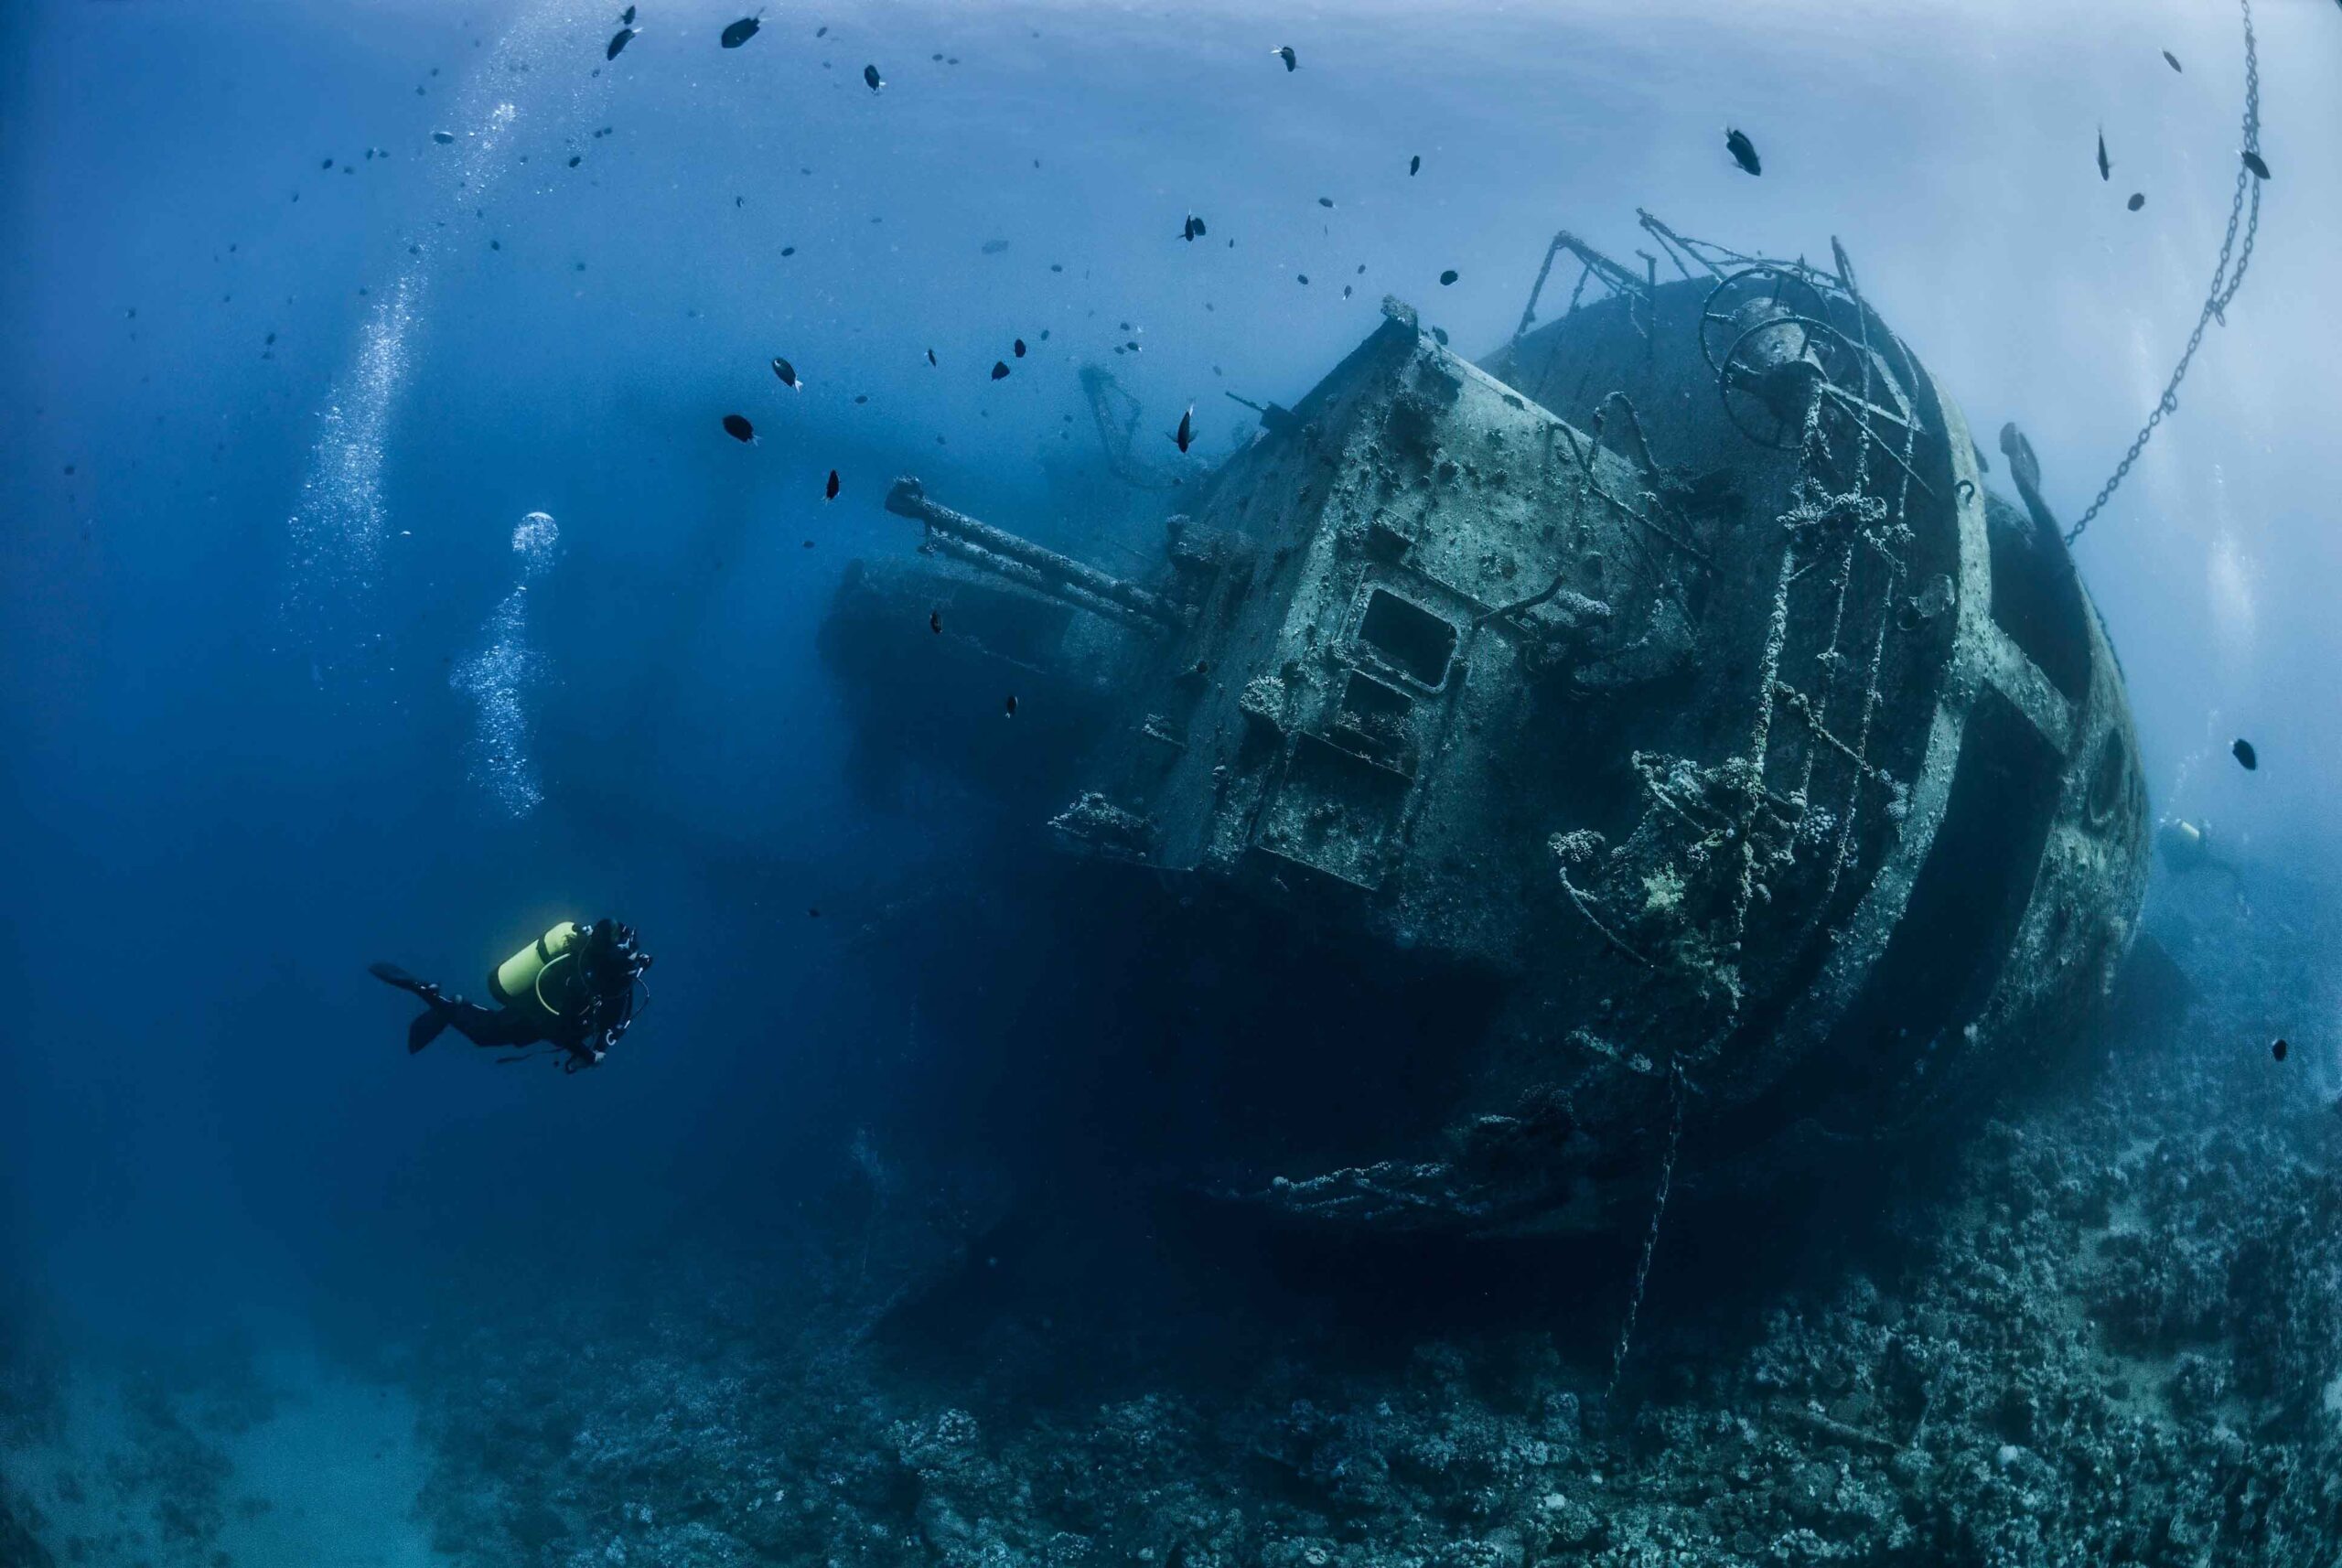 a diver exploring a sunken ship in the sea of cortez arranged by scuba club tucson